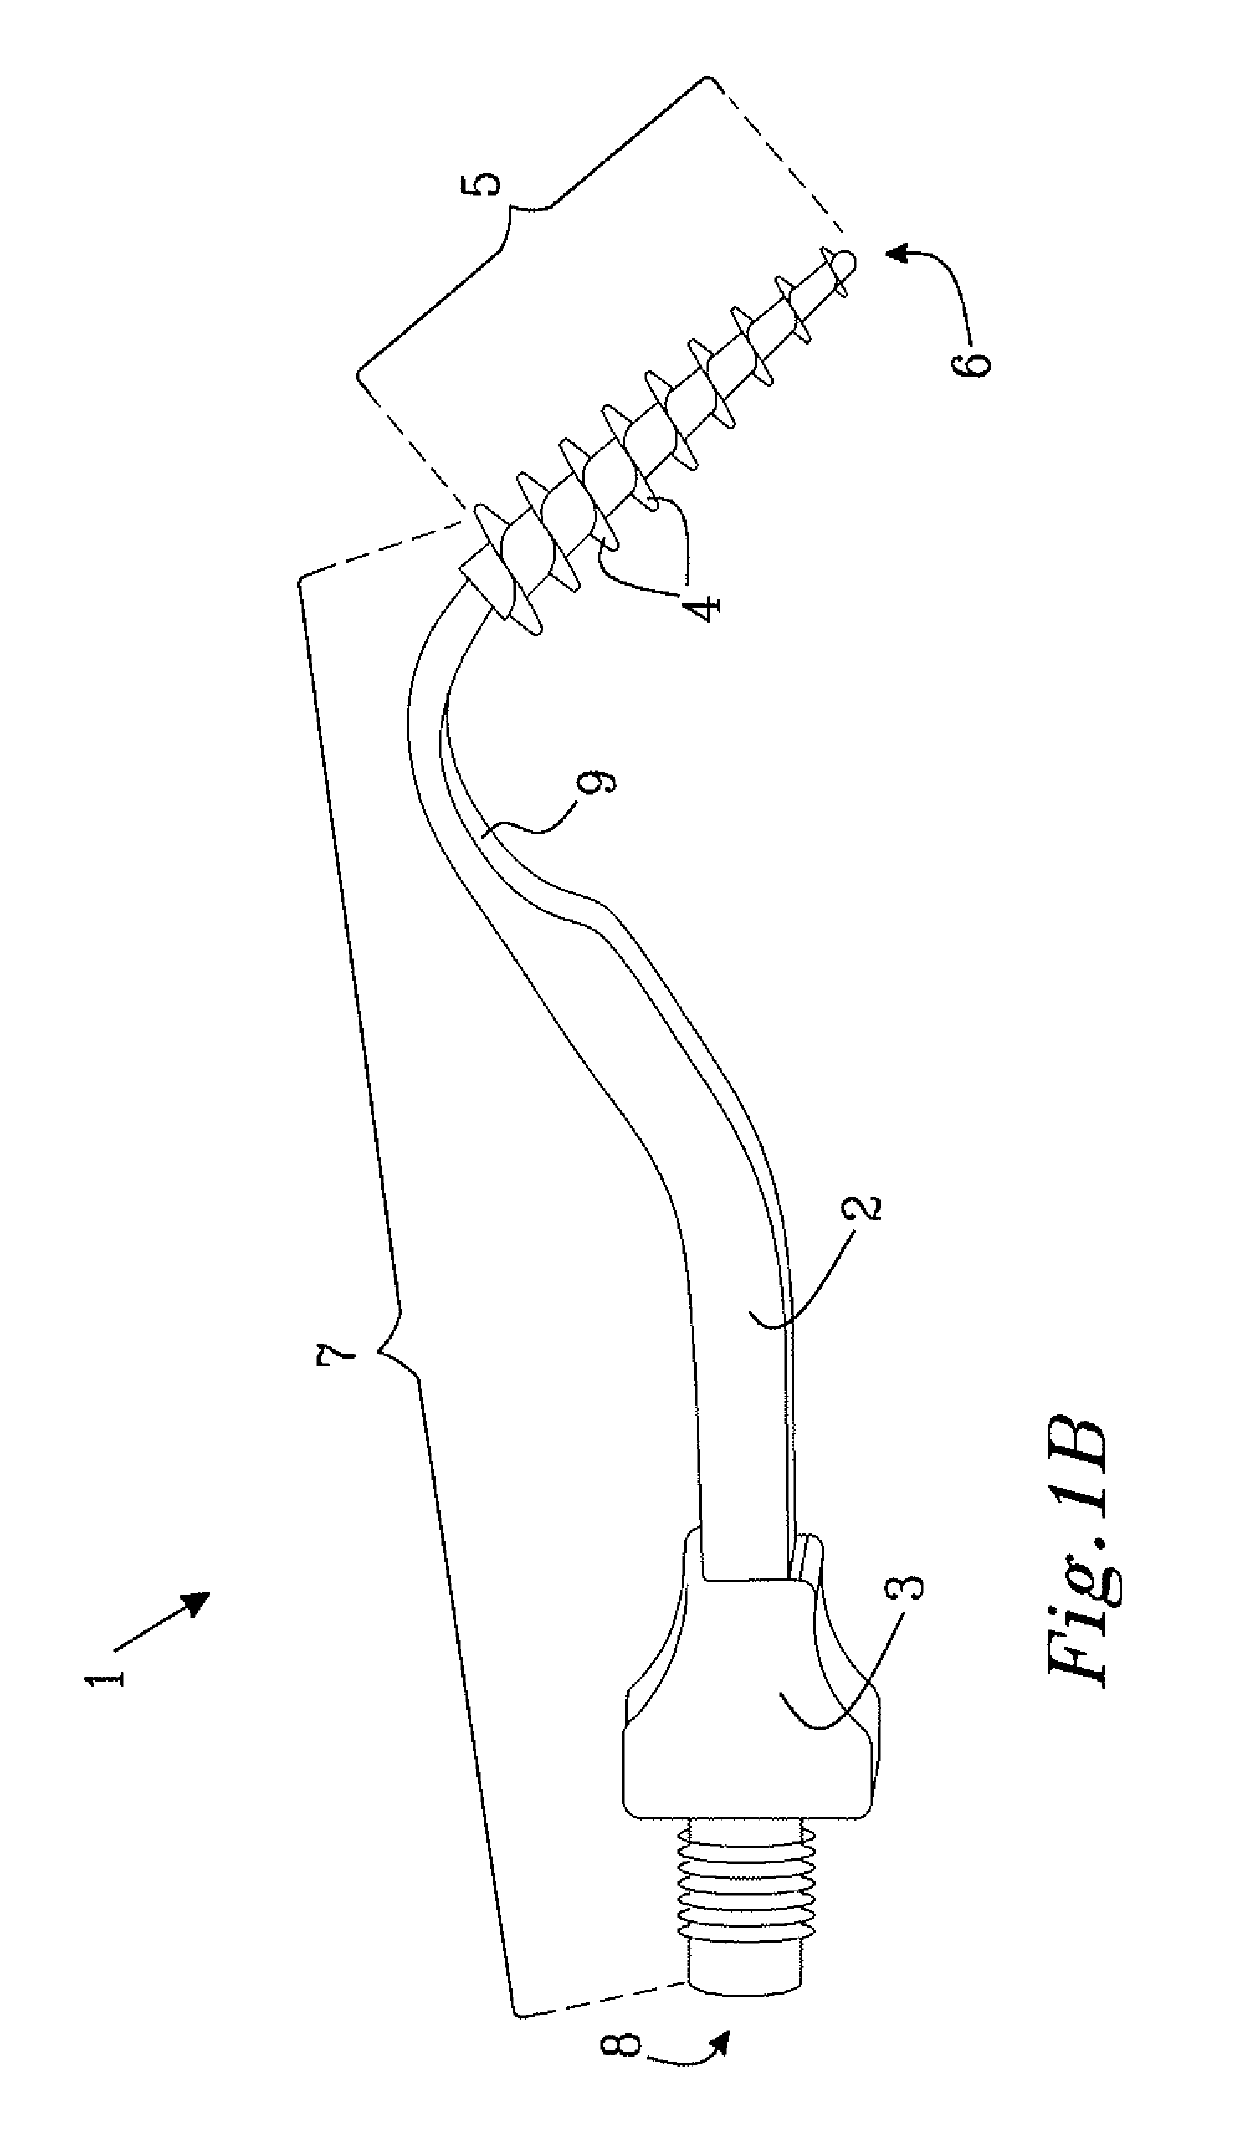 Bio-resorbable debride or implant cleaning tool and method of manufacturing the same